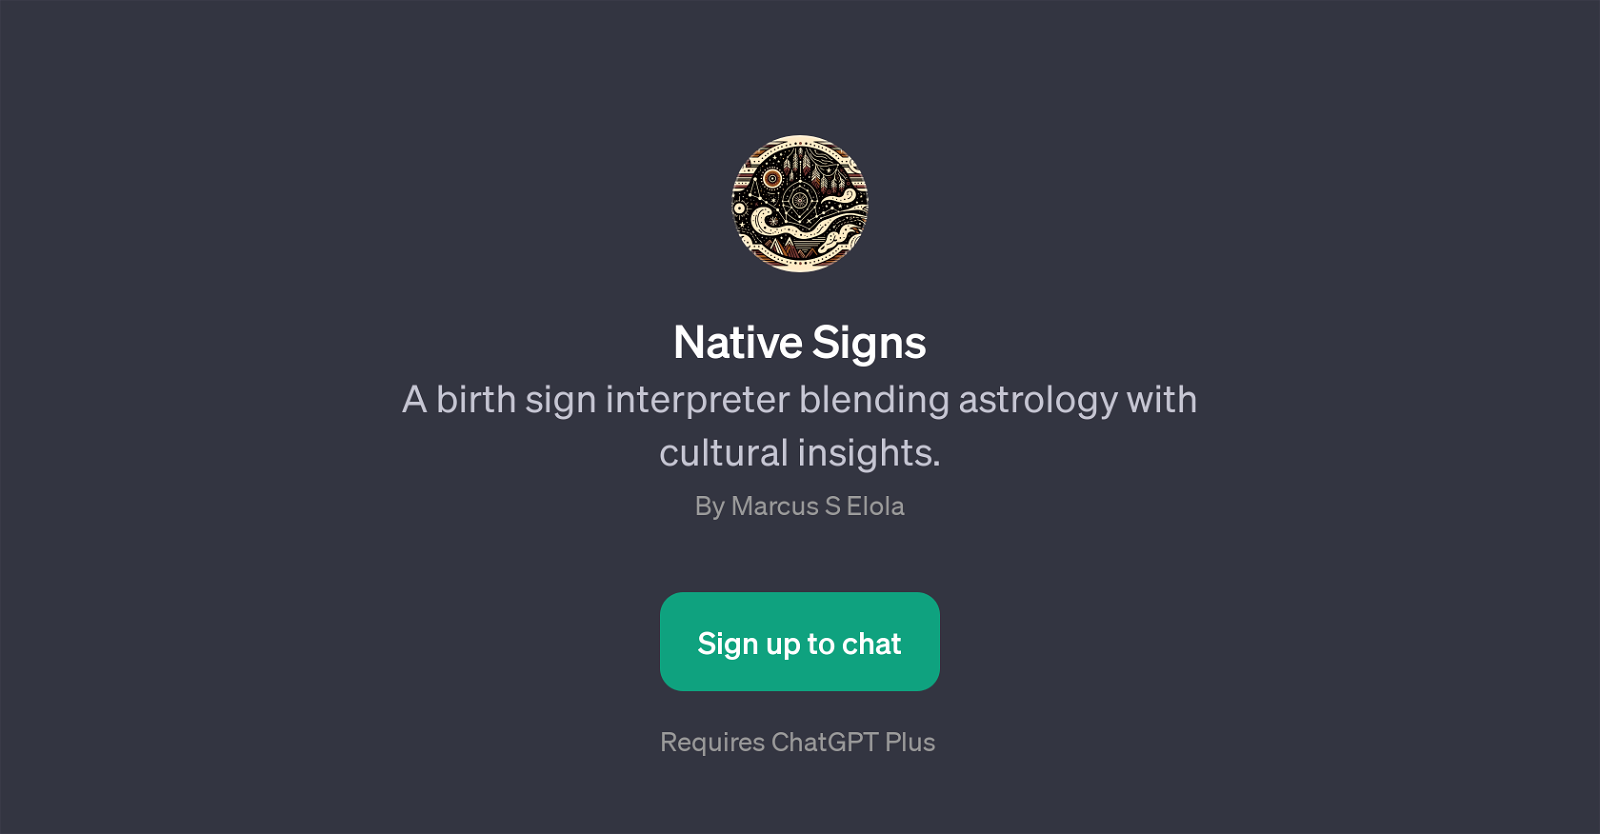 Native Signs website